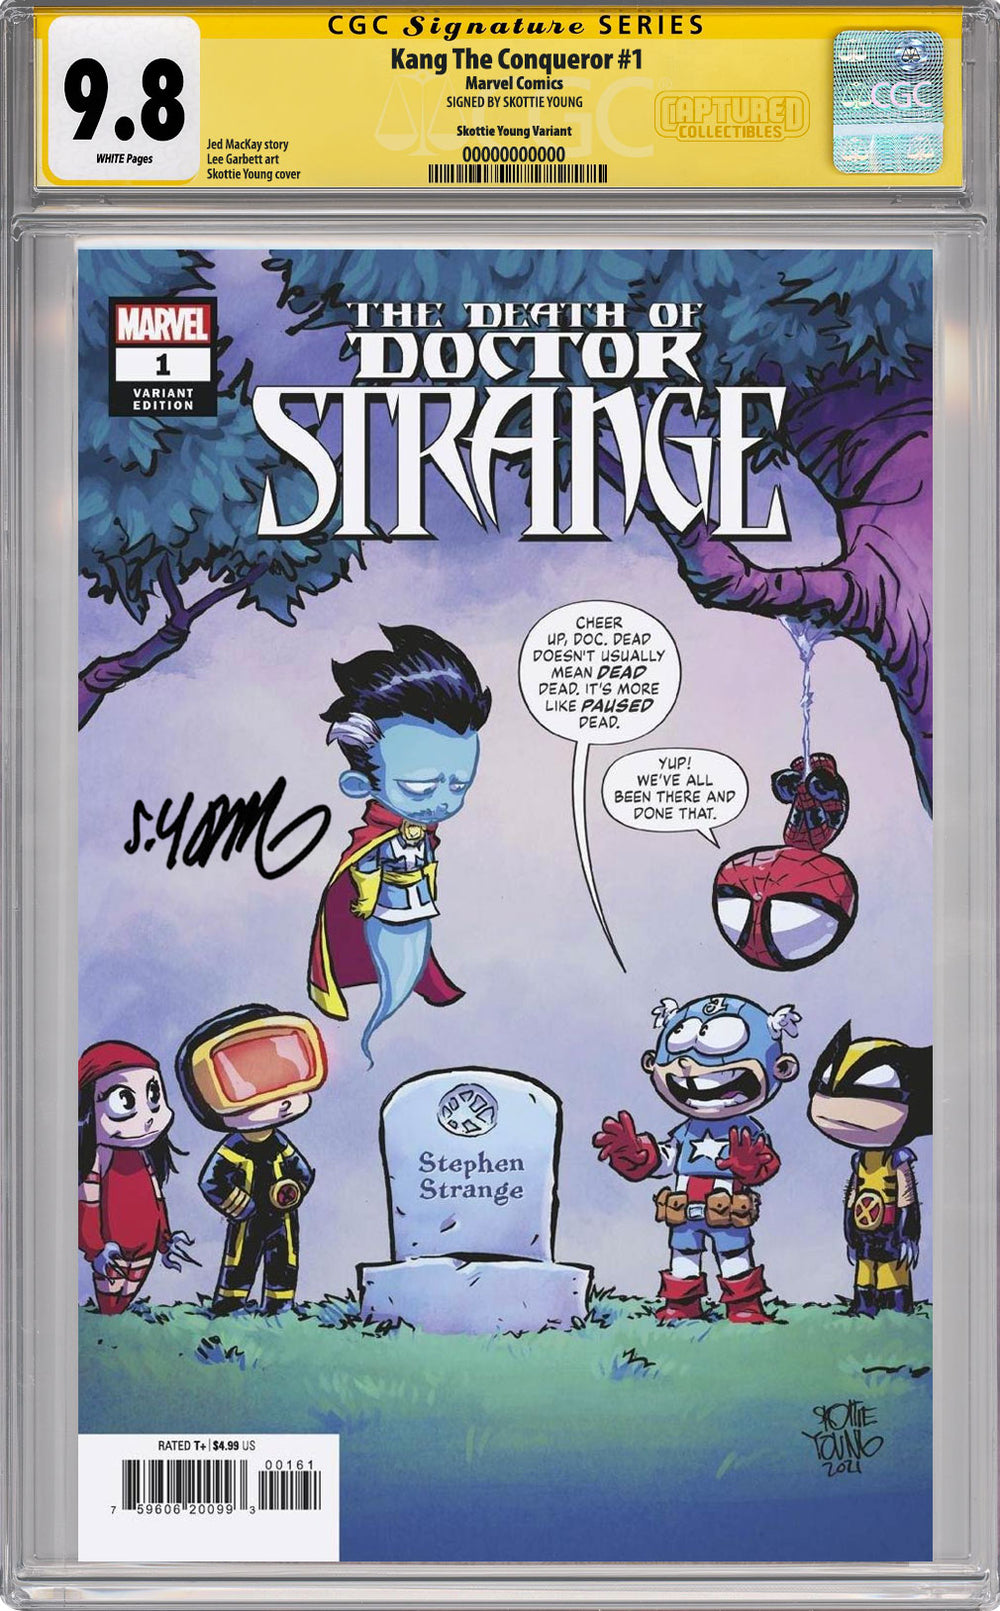 The Death of Doctor Strange #1 Variant CGC SS 9.8 Signed by Skottie Young